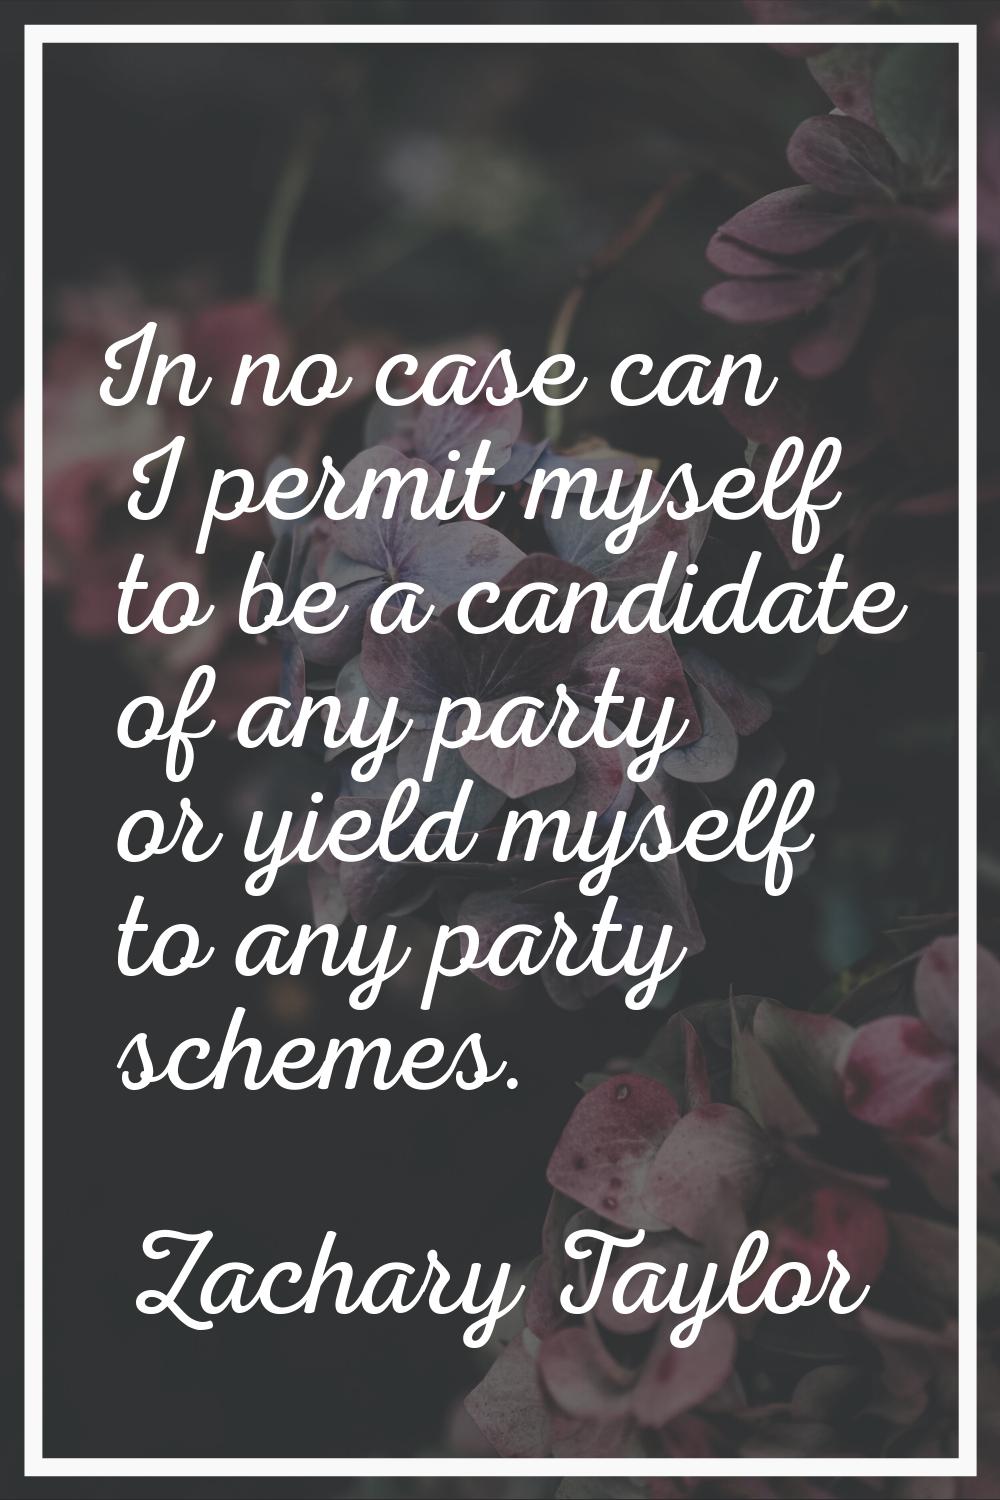 In no case can I permit myself to be a candidate of any party or yield myself to any party schemes.